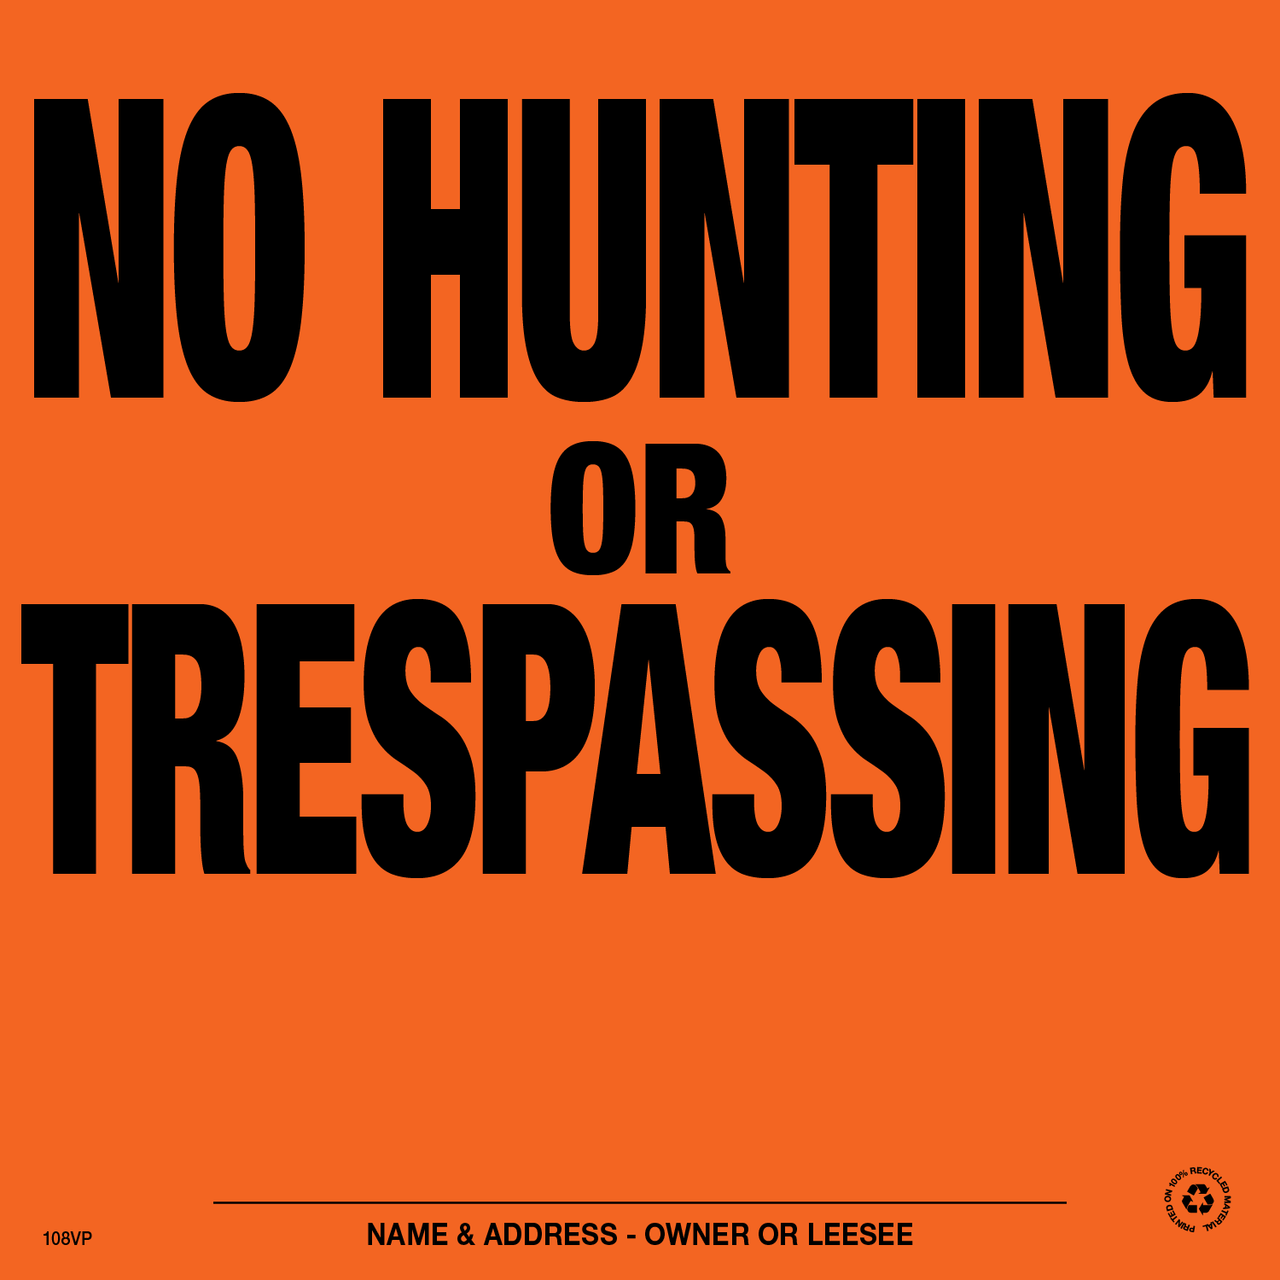 No Hunting or Trespassing Posted Signs - Orange Aluminum - Pack of 25